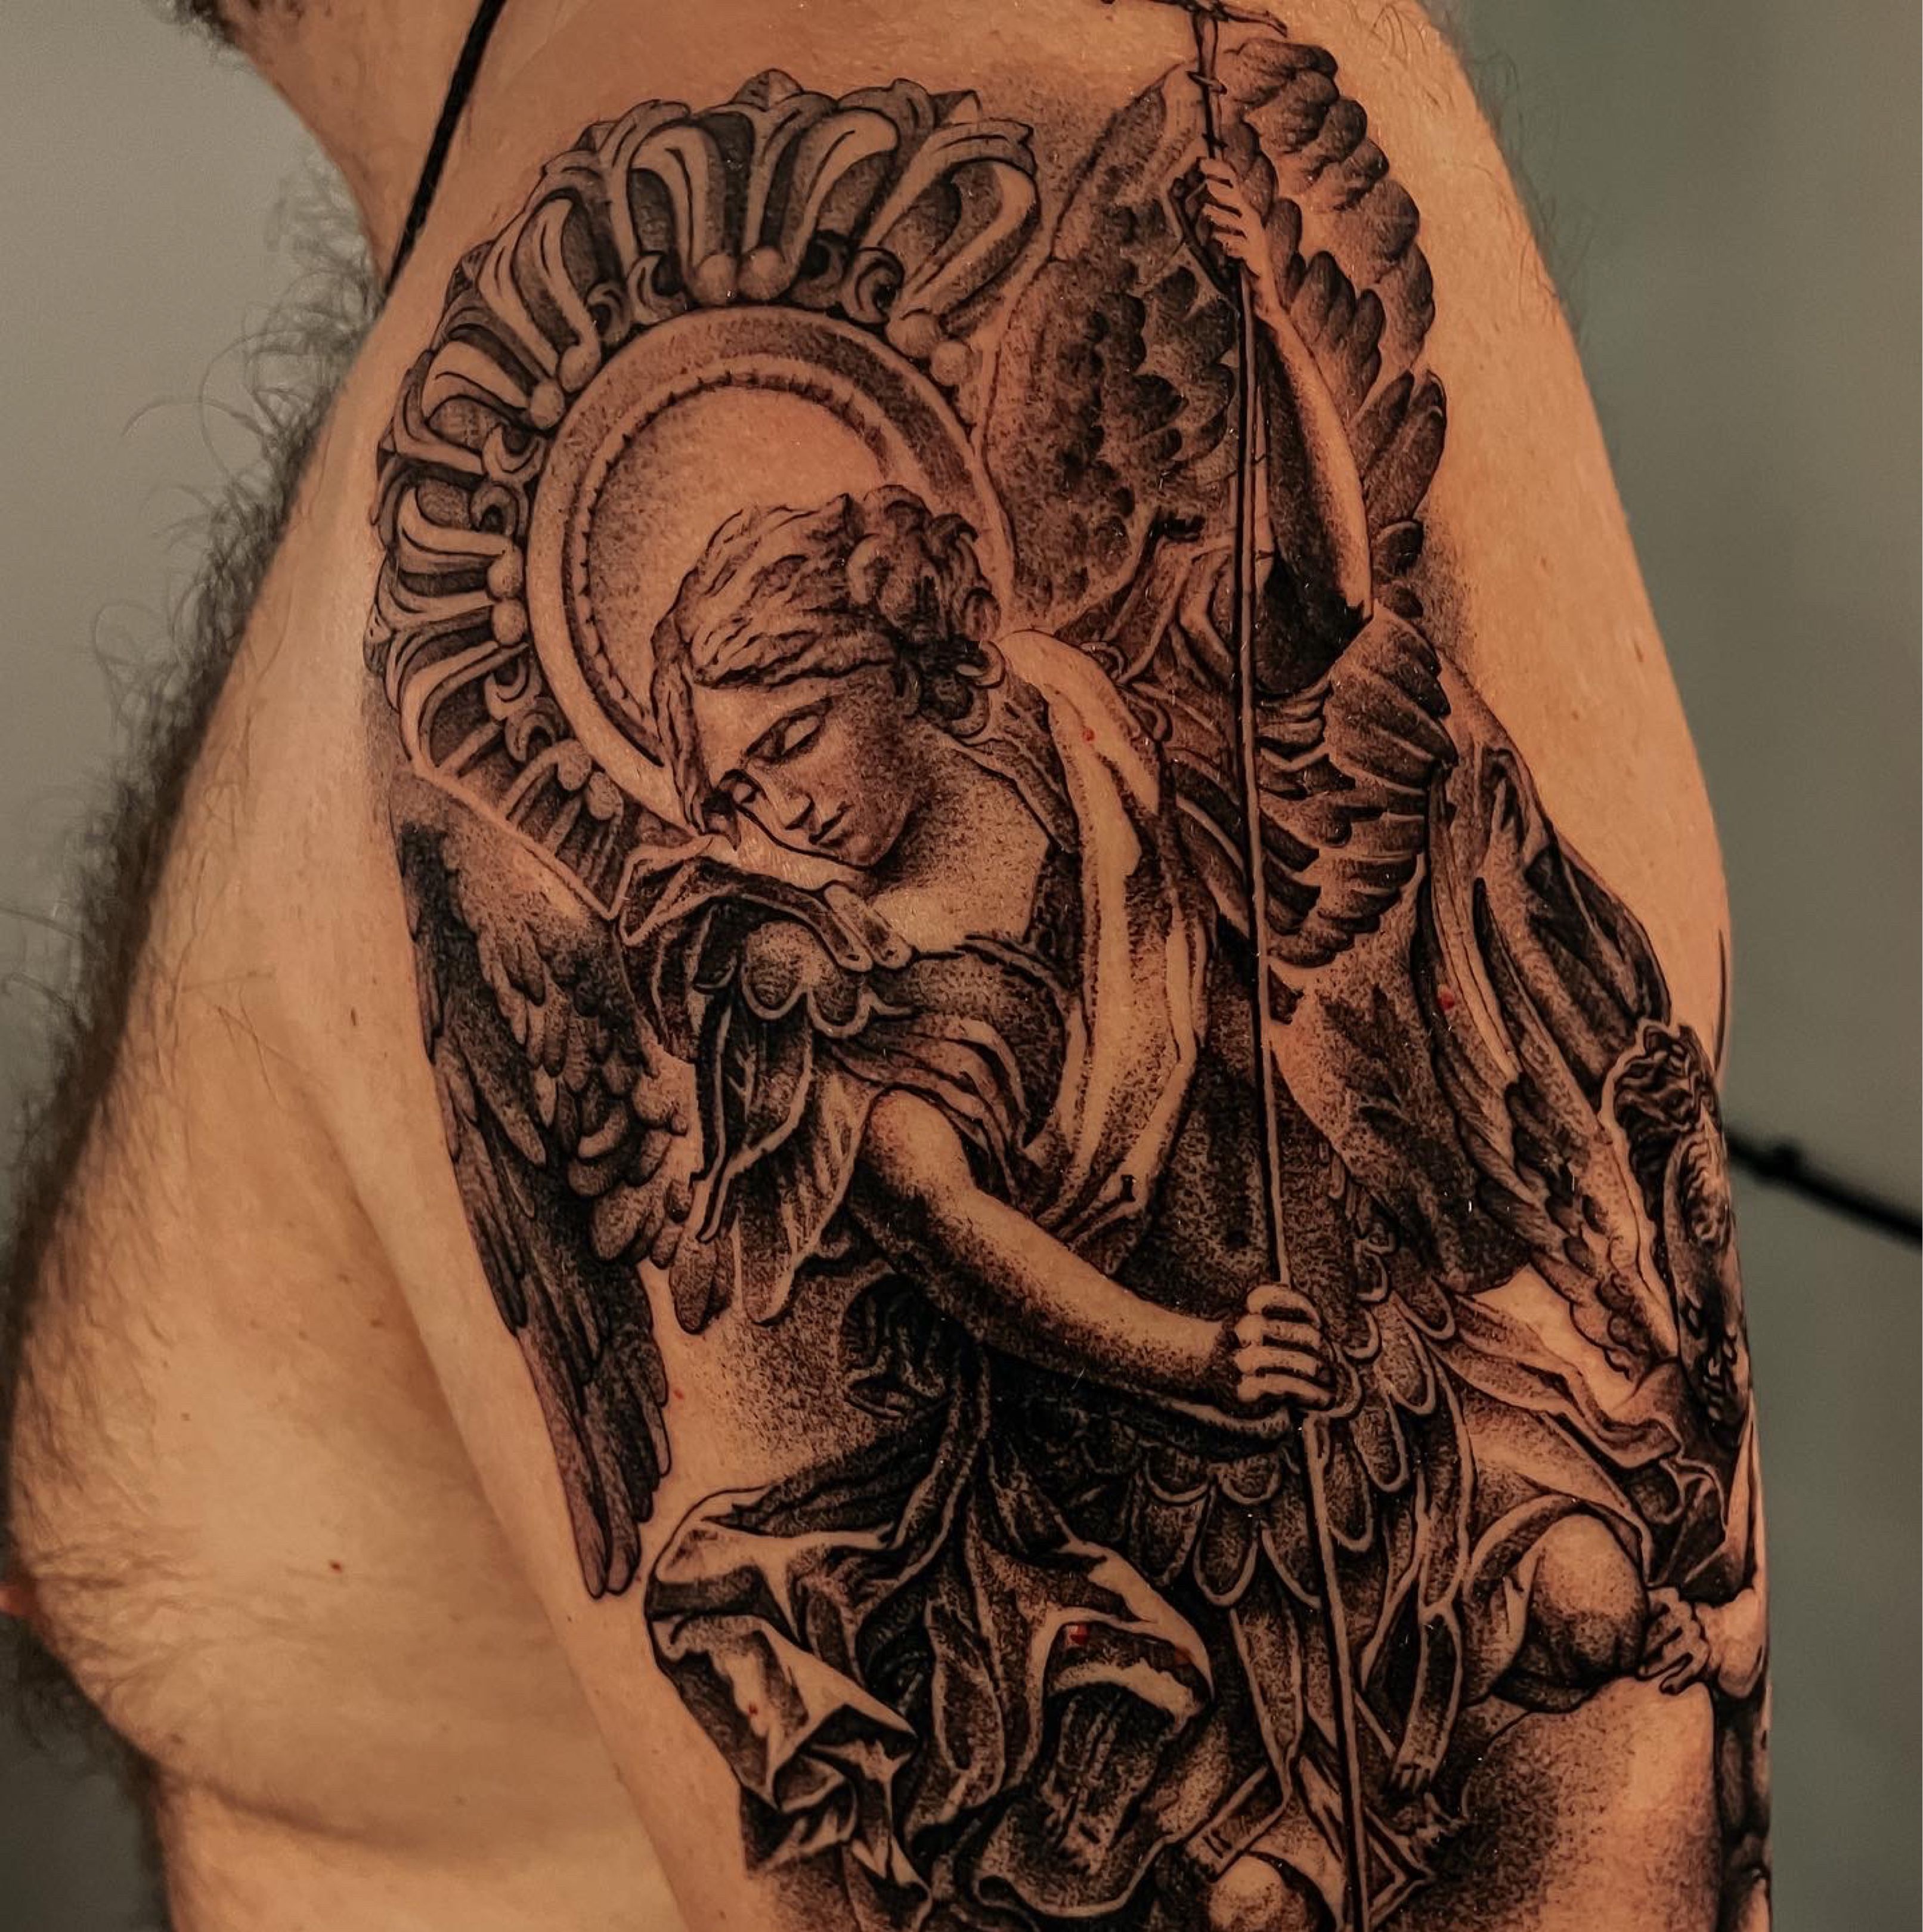 21+ St Michael Tattoo Ideas You Have To See To Believe! - alexie